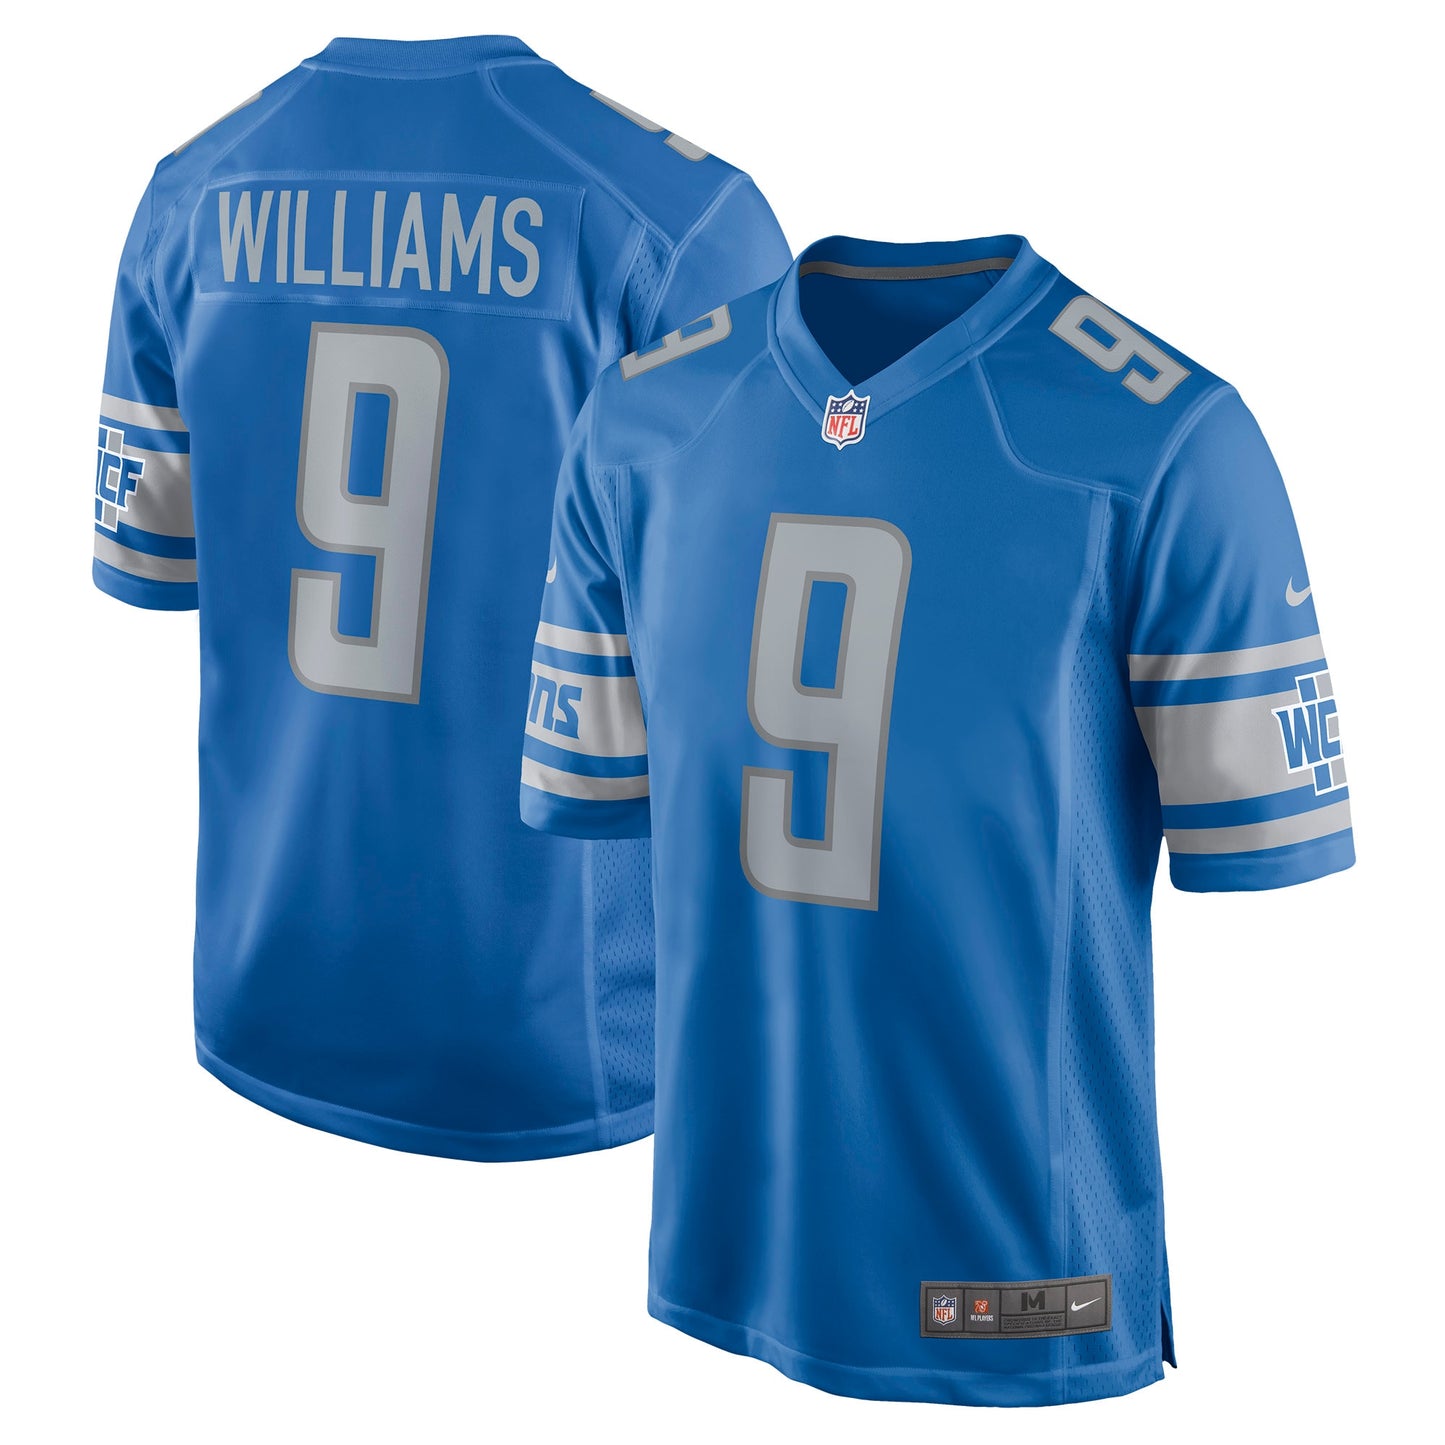 Jameson Williams Detroit Lions Nike Player Game Jersey - Blue